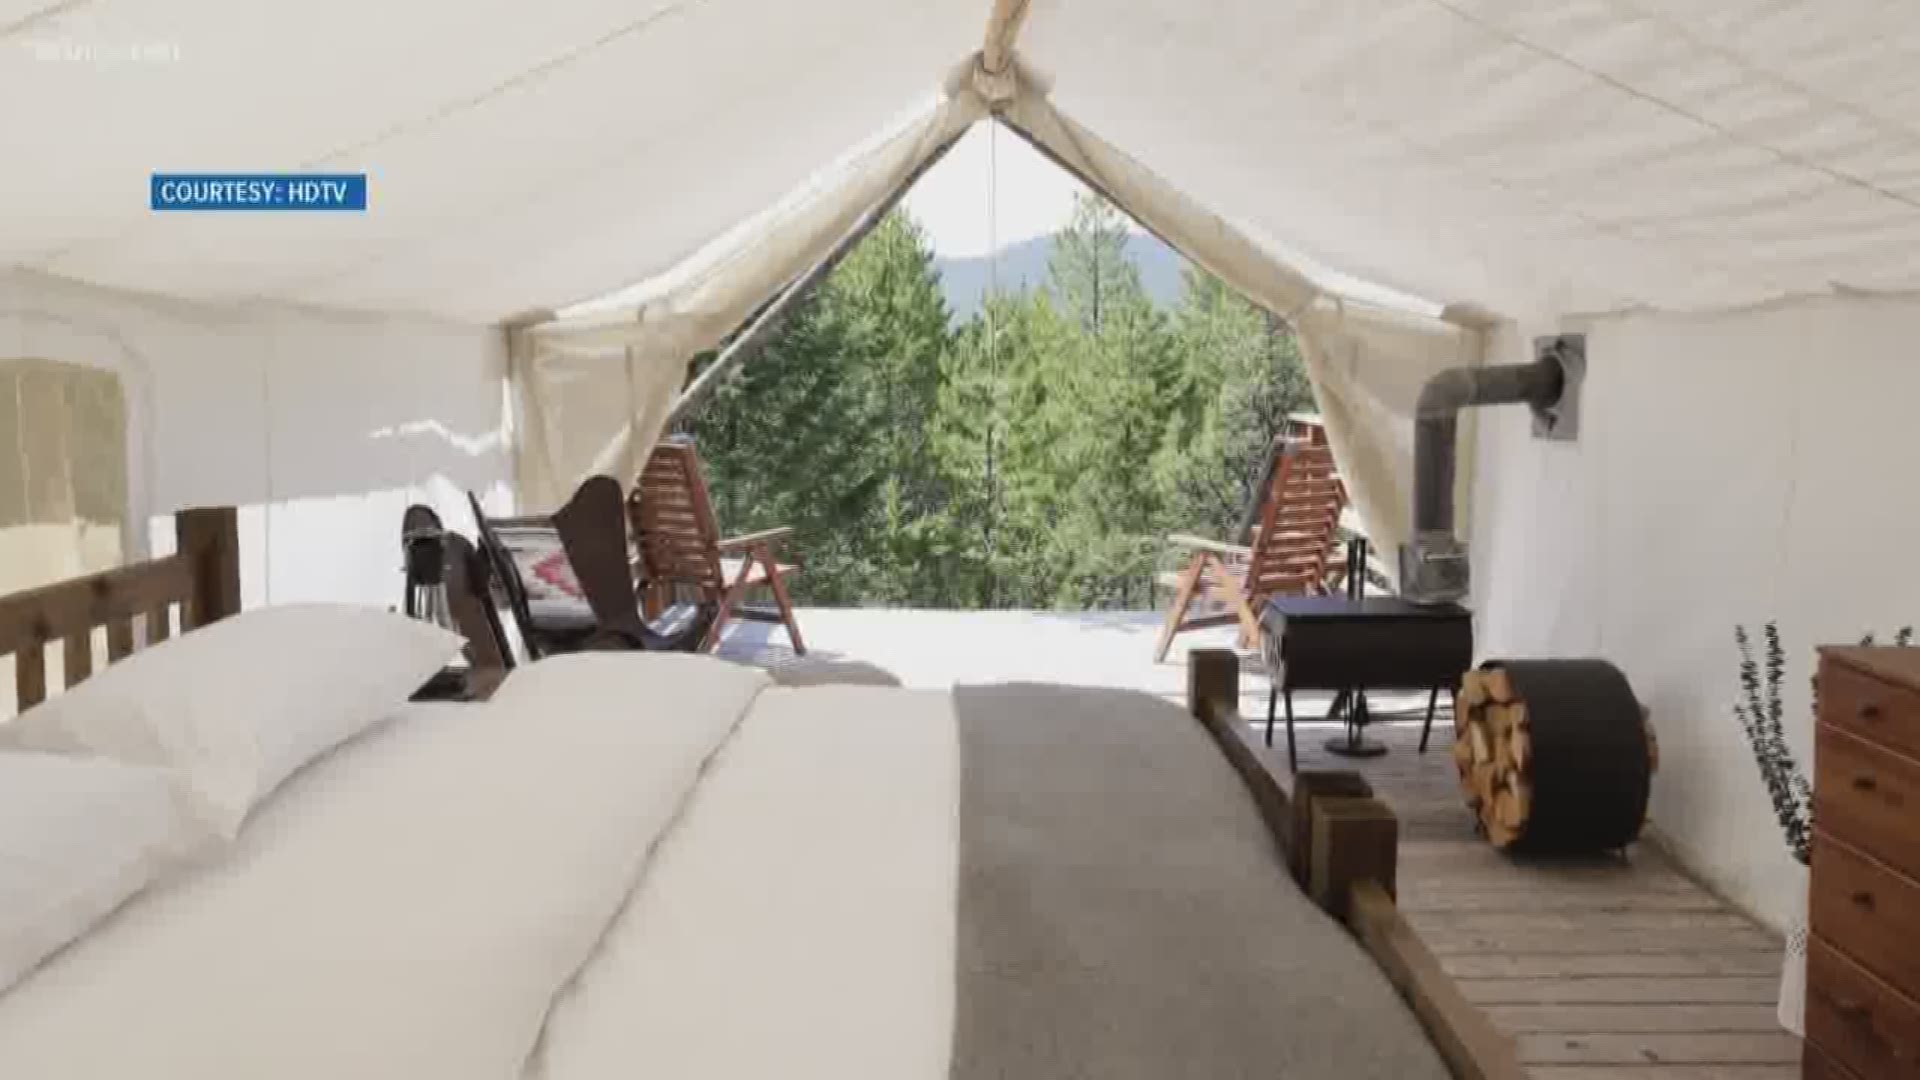 Dave Jones from the Tennessee department of tourist development shares where to go glamping if you aren't into the outdoors but still want to try camping.